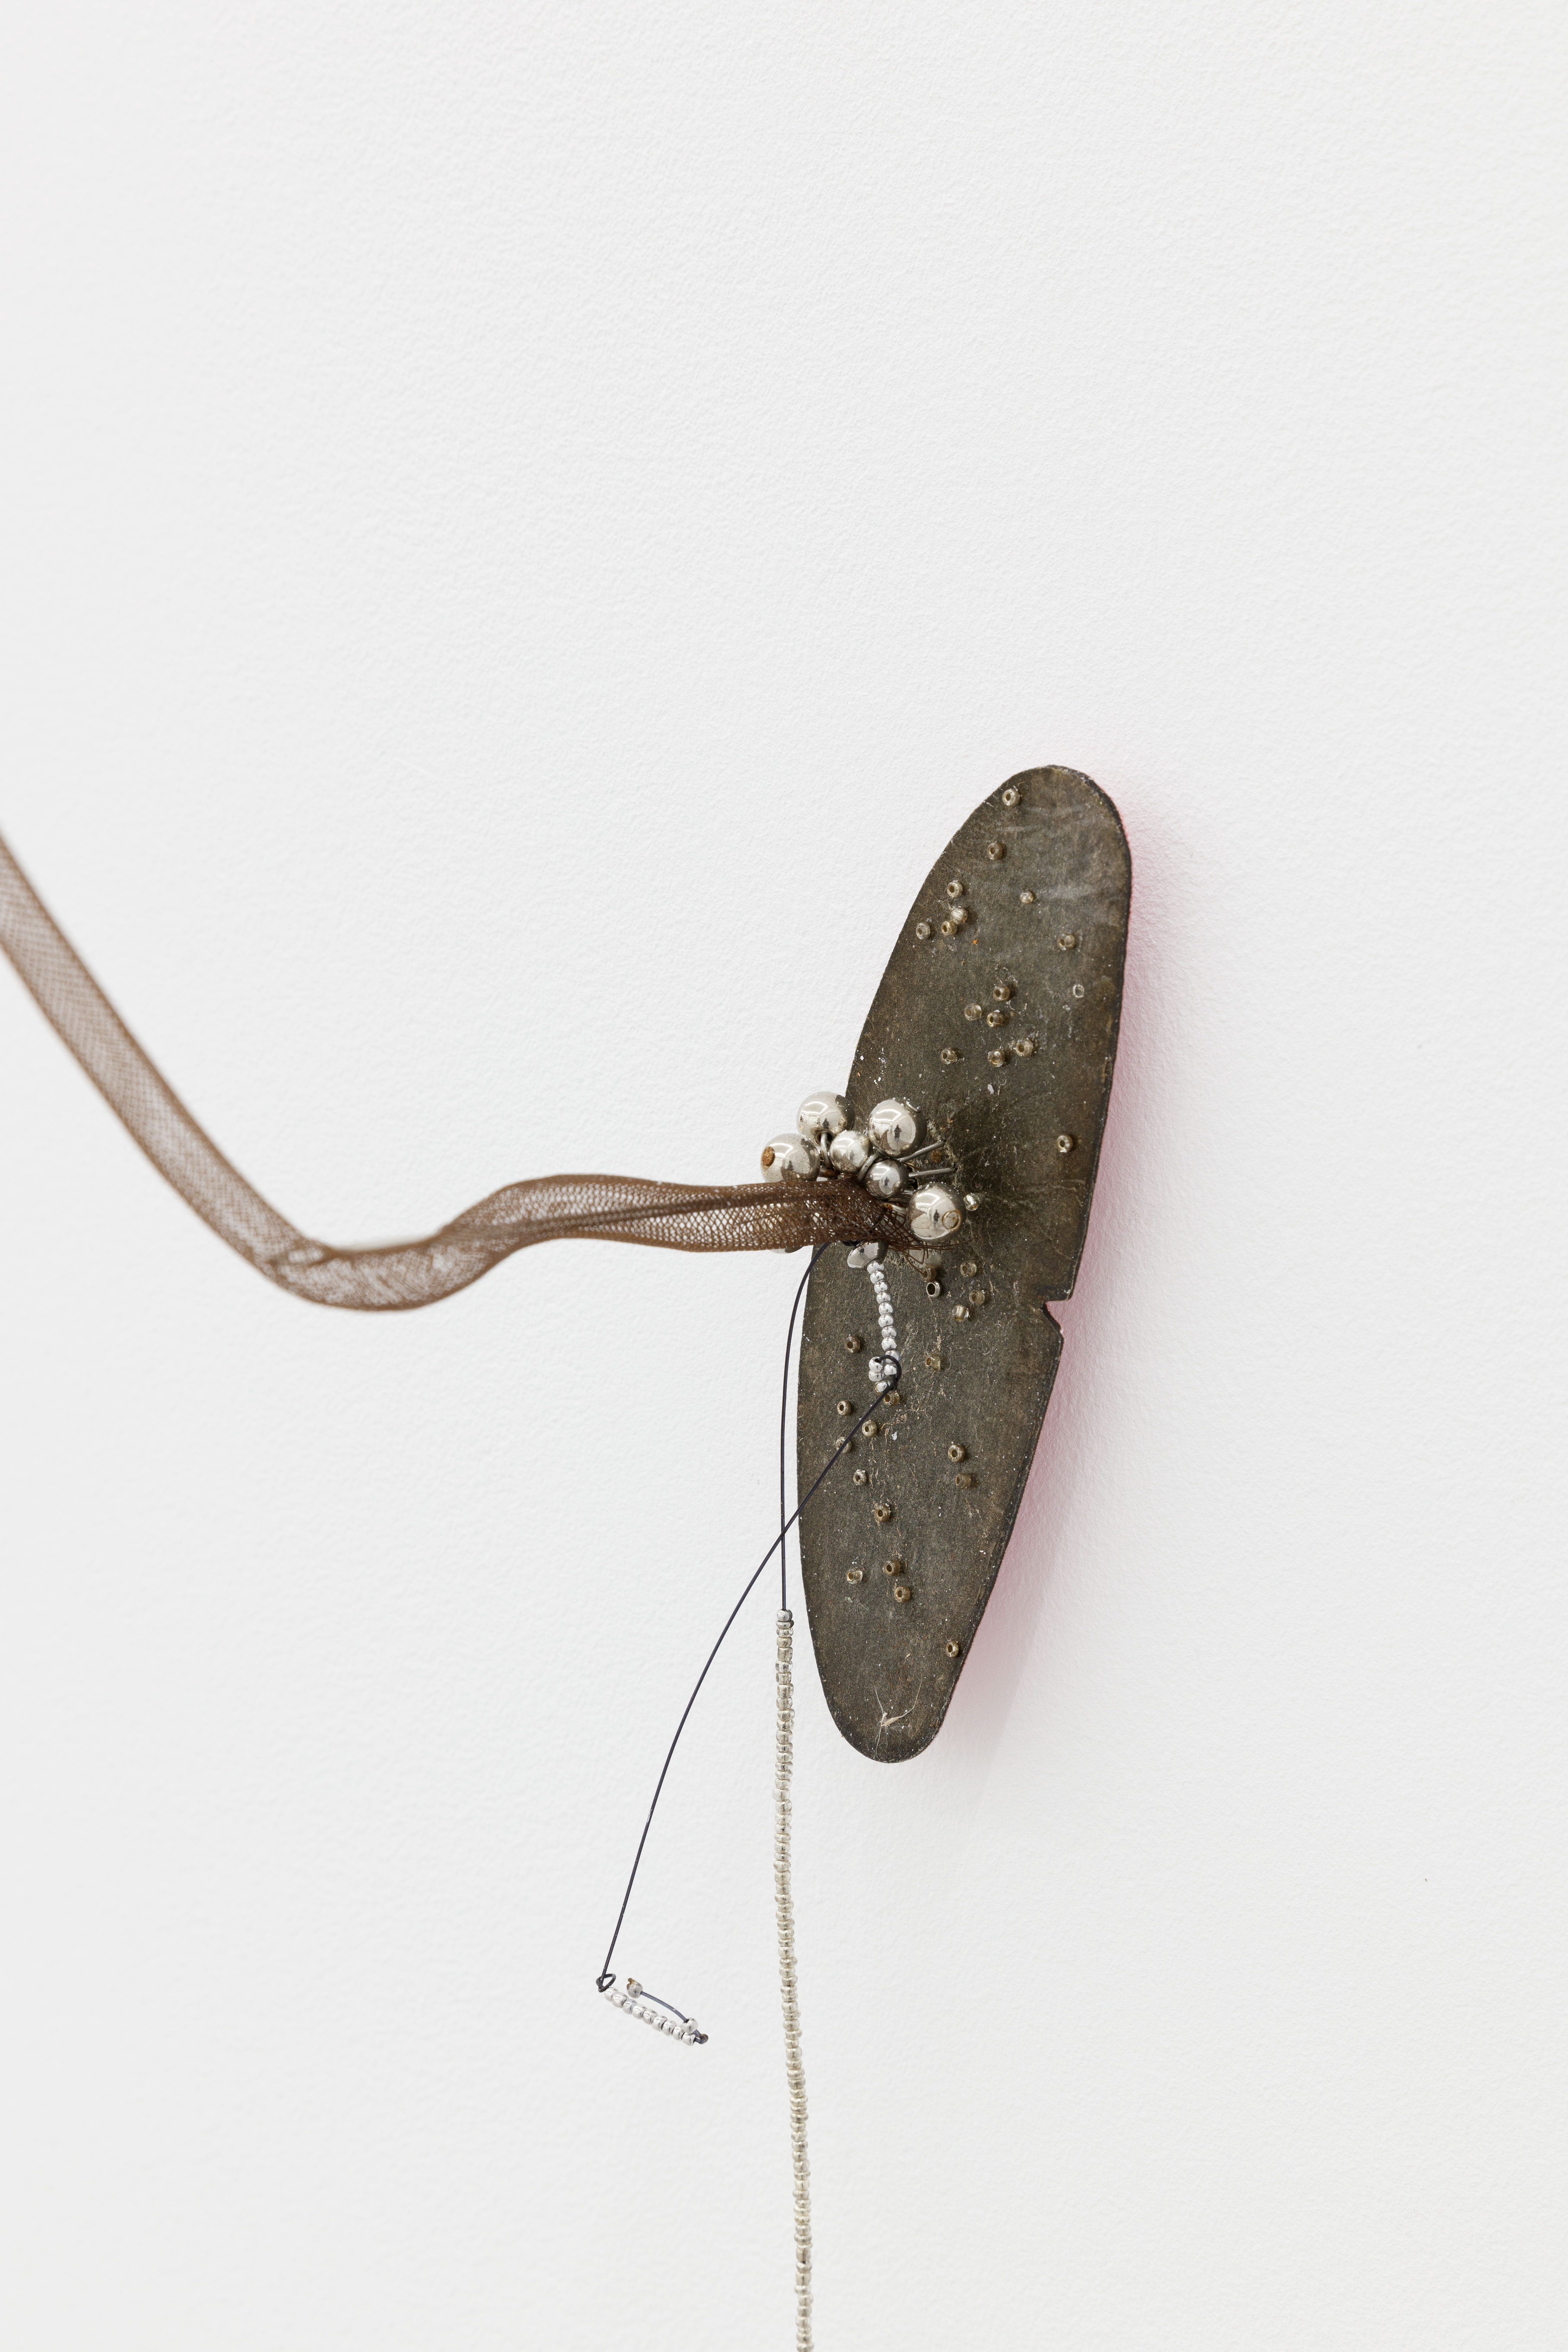 Nie Ohne Seife Waschen (Oddity), 2022, Diana Barbosa Gil, sewing accessories, needle, seeds, silicone, plastic, fishing supplies, insoles, brass, plants, variable dimensions (Diana Barbosa Gil @dianabarbosagil)